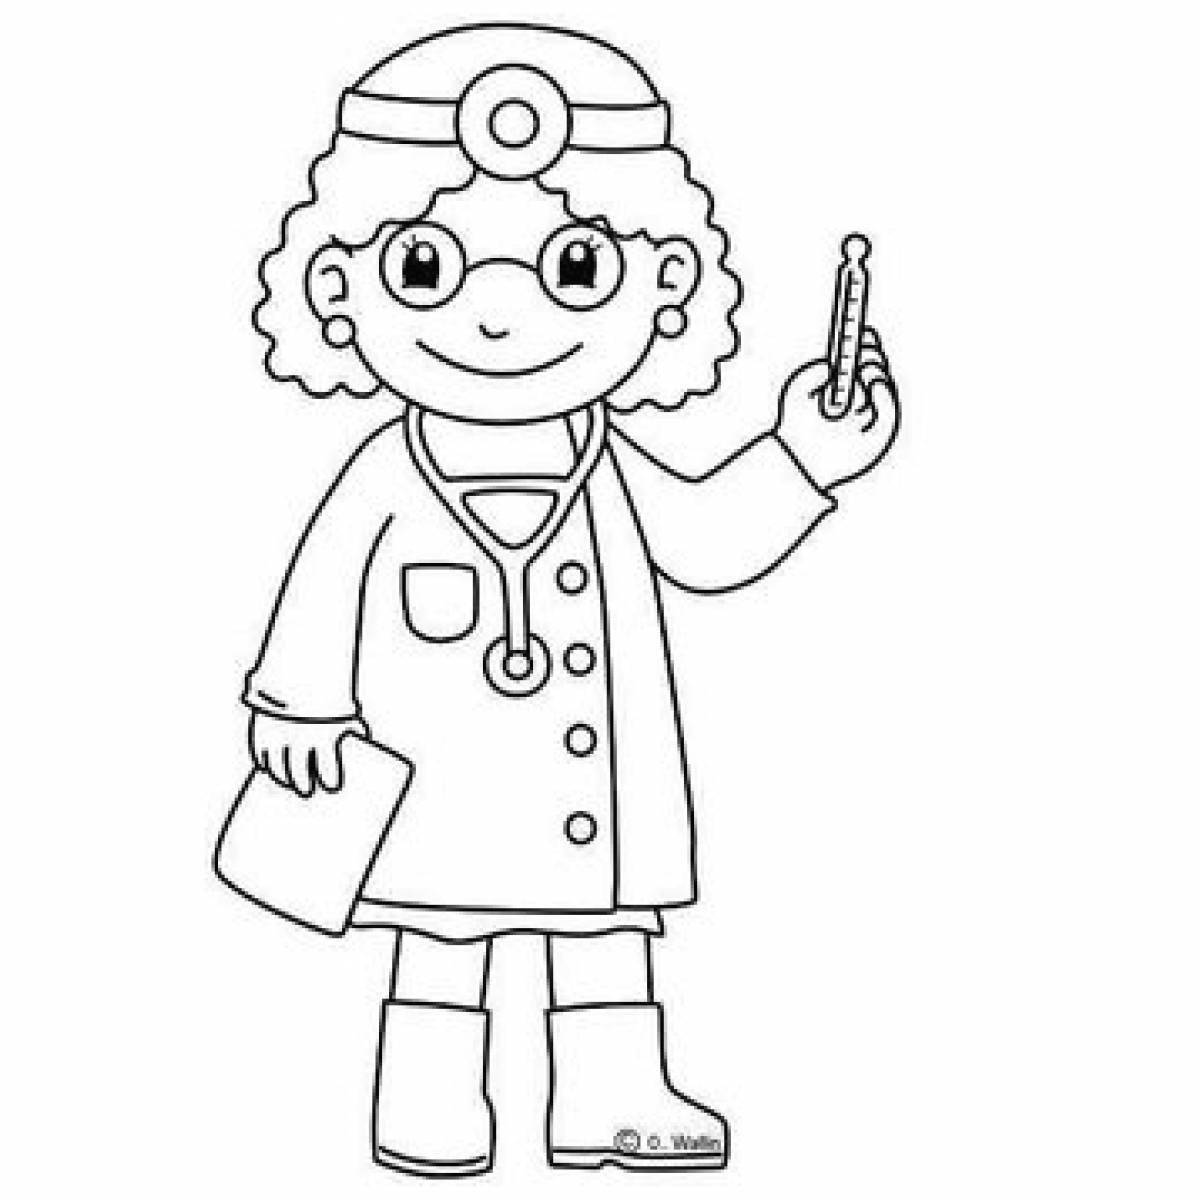 Colorful job coloring pages for little students